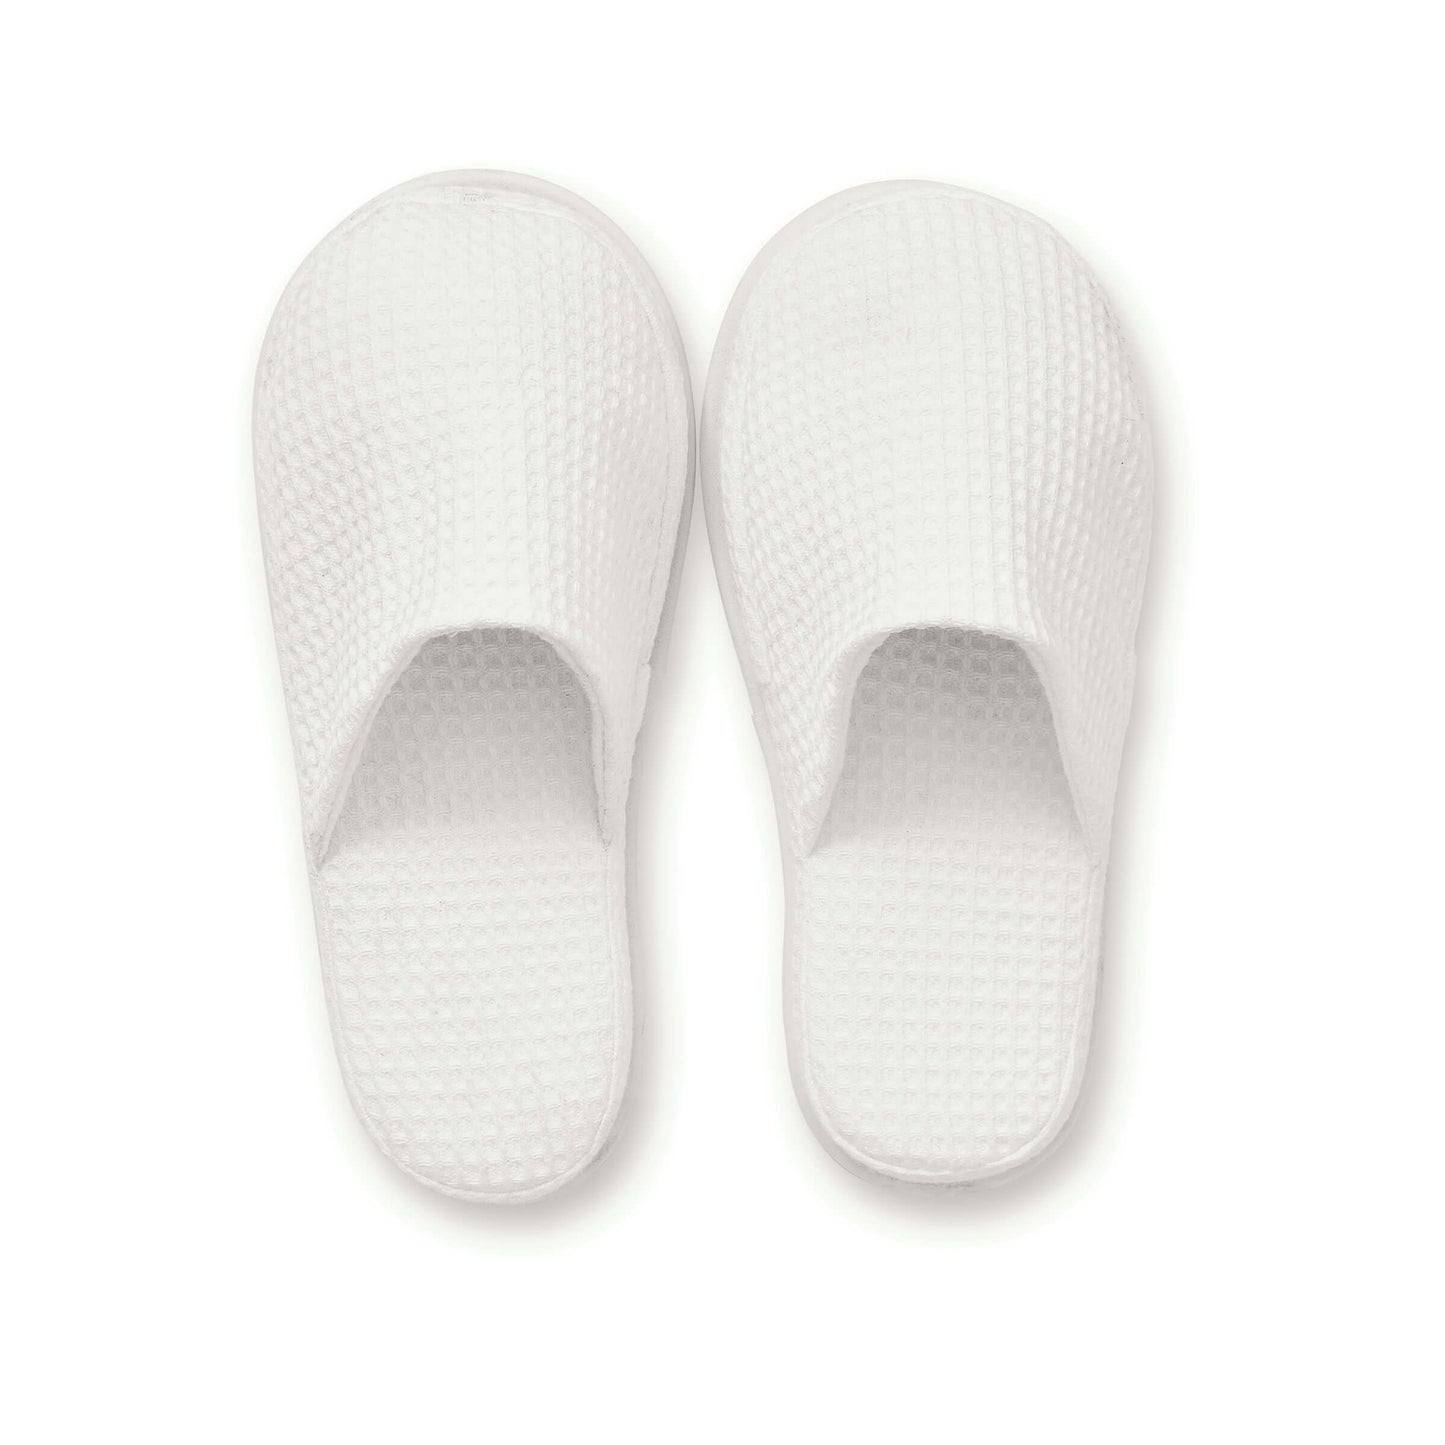 Spa Collection Waffle Slippers, White